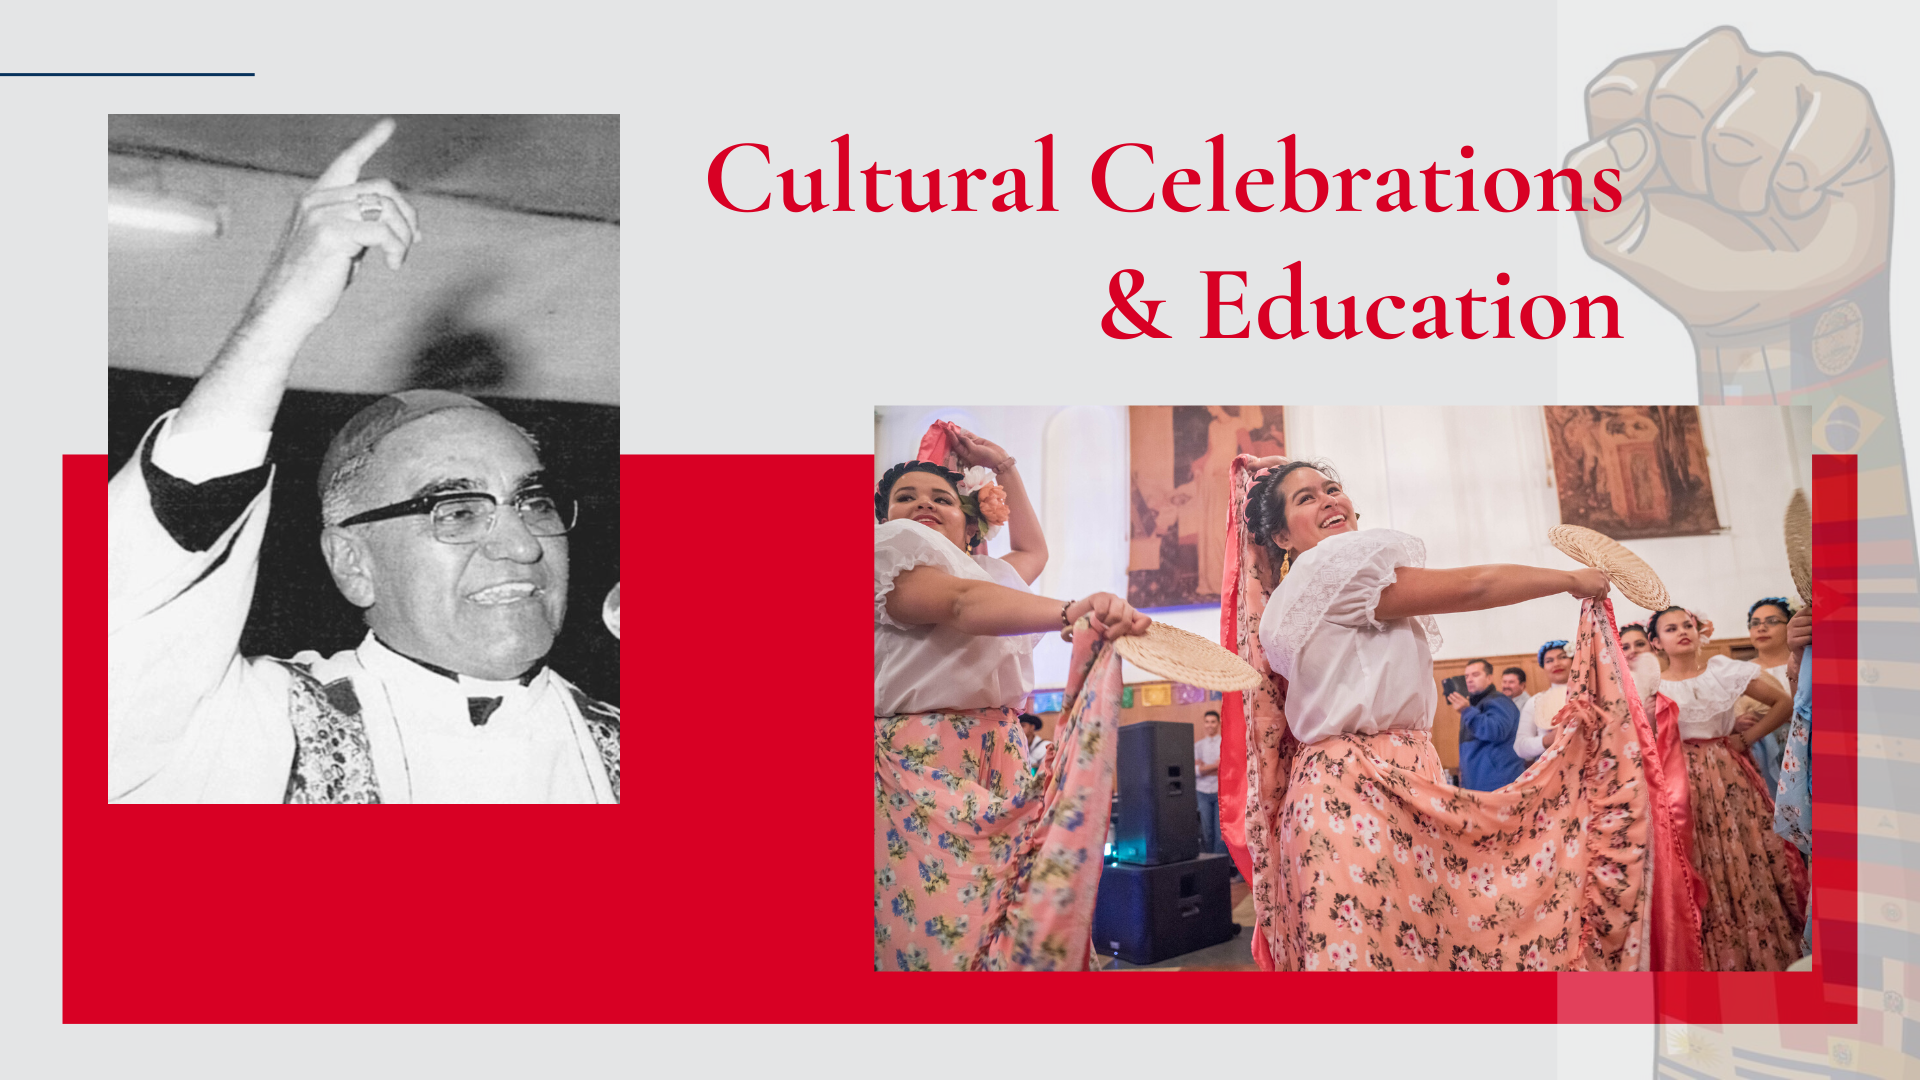 Red and grey banner with the words "Cultural Celebrations and Education" and an image of Oscar Romero and an image of dancers at a cultural celebration